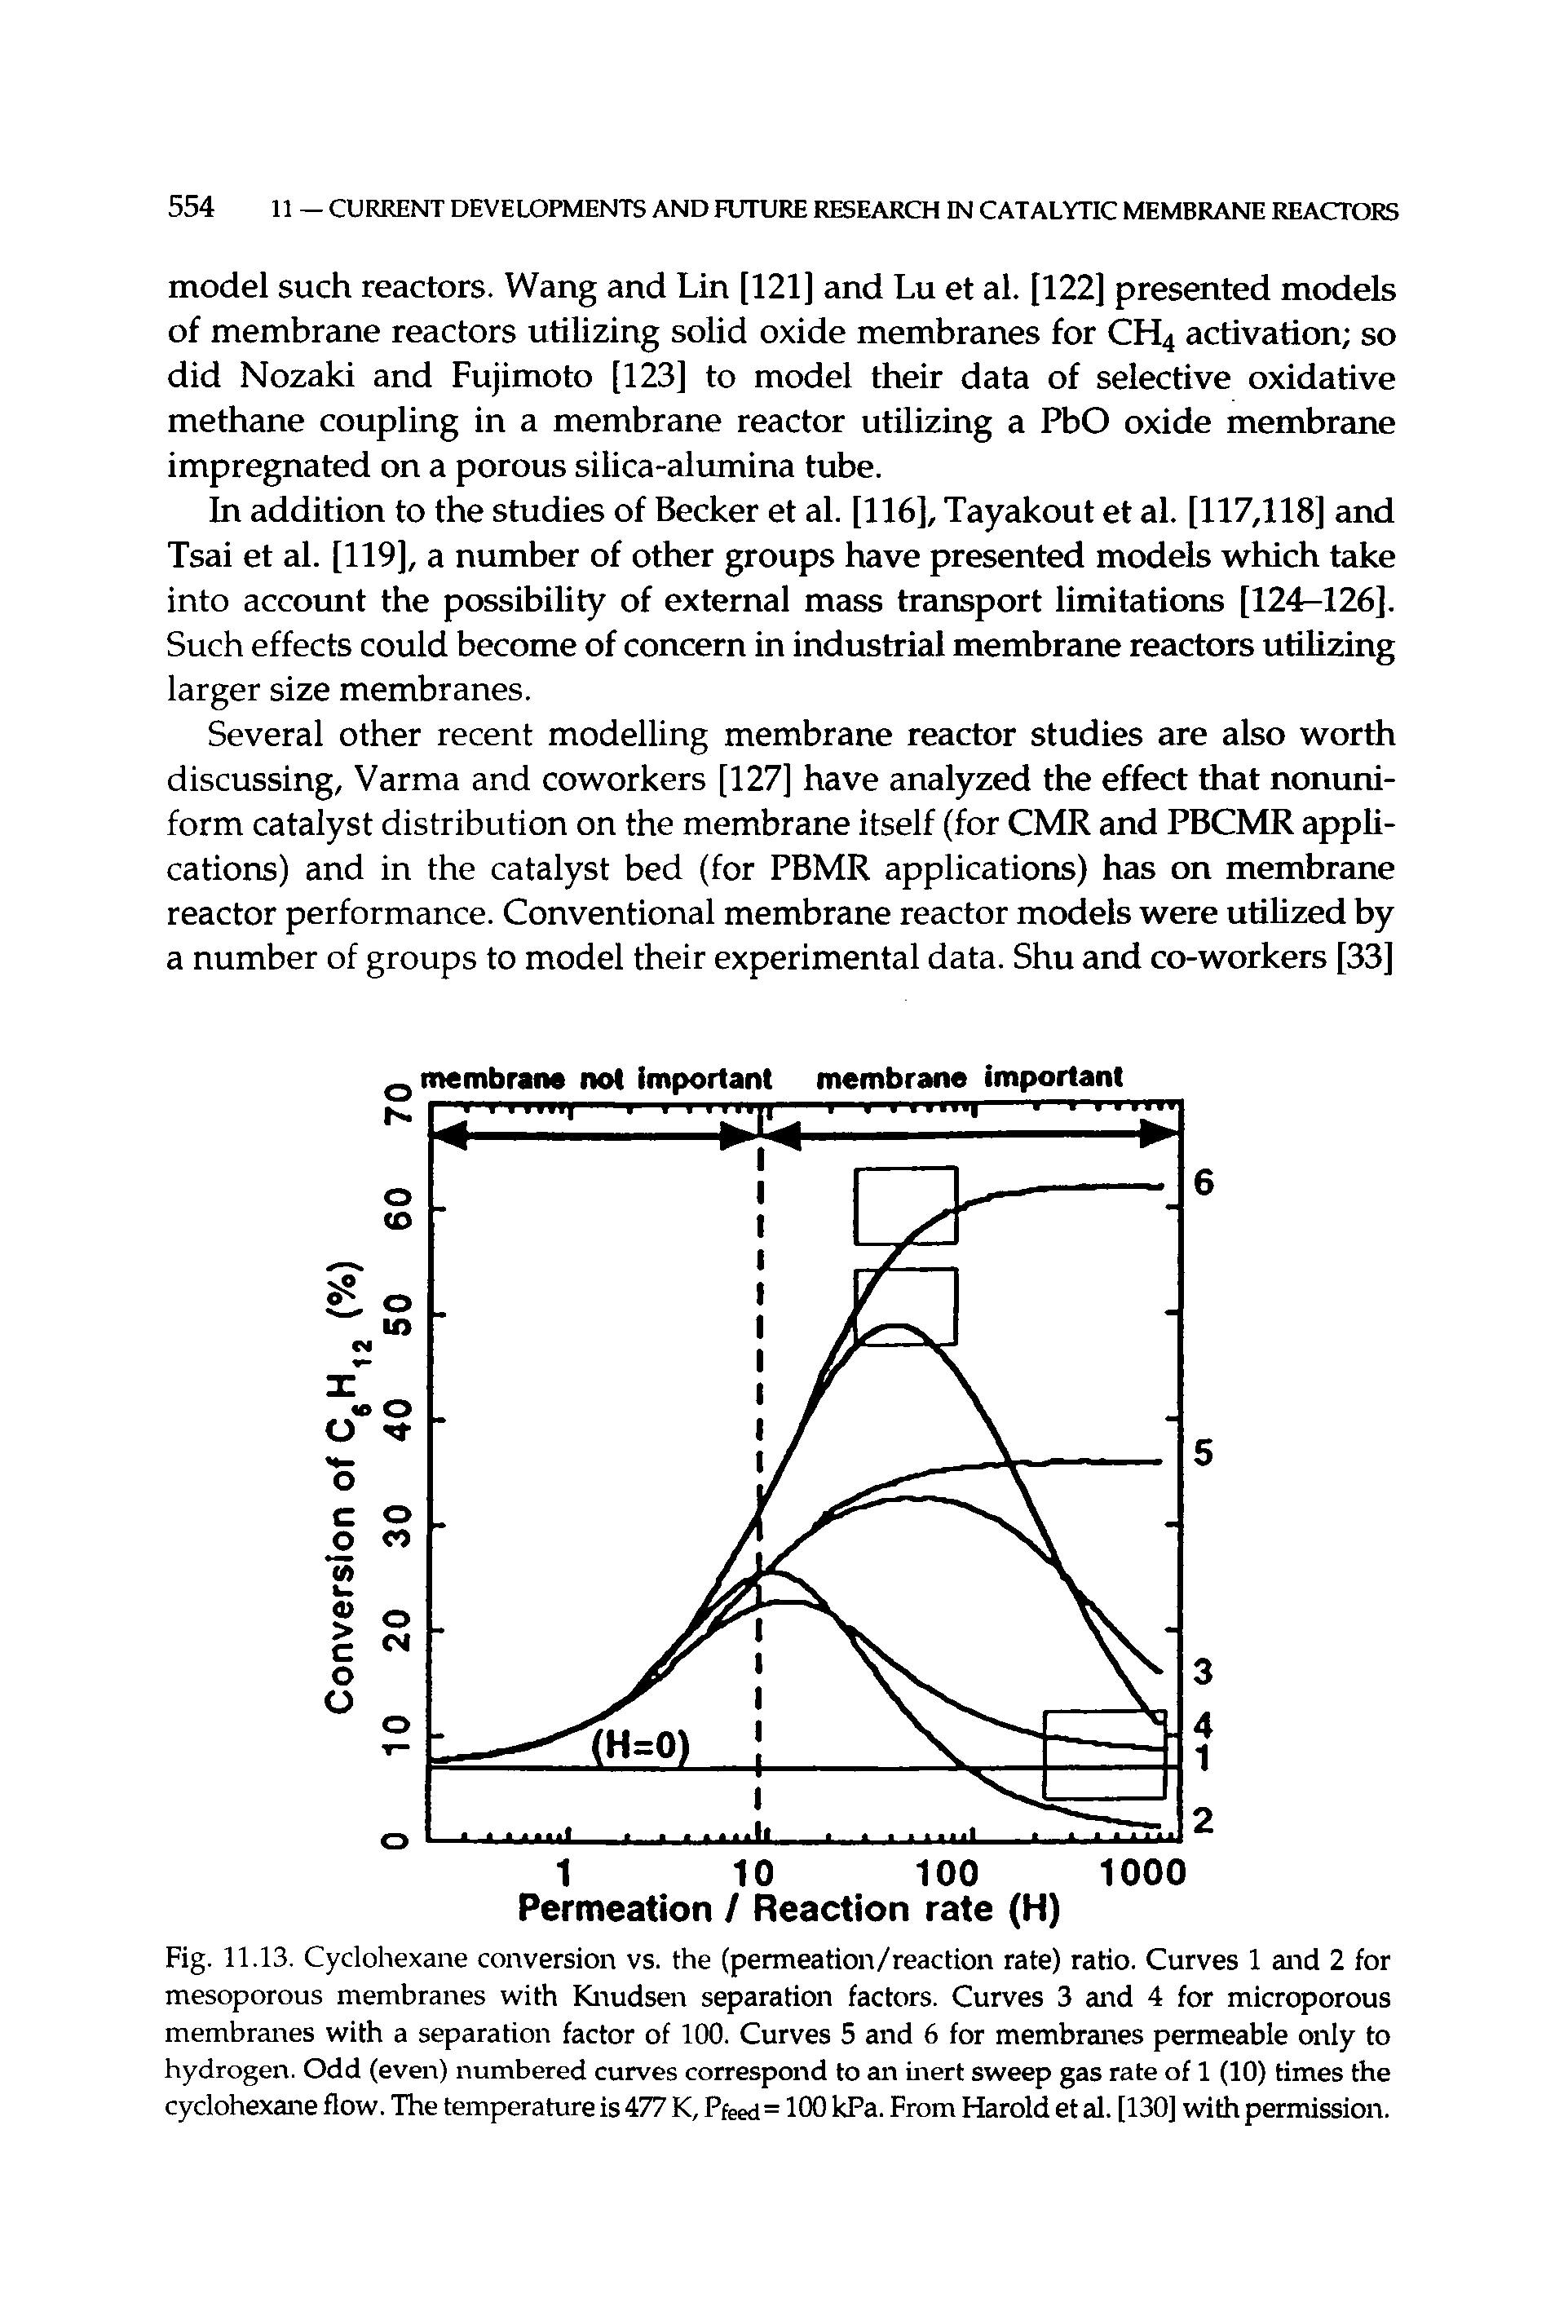 Fig. 11.13. Cyclohexane conversion vs. the (permeation/reaction rate) ratio. Curves 1 and 2 for mesoporous membranes with Knudsen separation factors. Curves 3 and 4 for microporous membranes with a separation factor of 100. Curves 5 and 6 for membranes permeable only to hydrogen. Odd (even) numbered curves correspond to an inert sweep gas rate of 1 (10) times the cyclohexane flow. The temperature is 477 K, Pfeed= 100 kPa. From Flarold et al. [130] with permission.